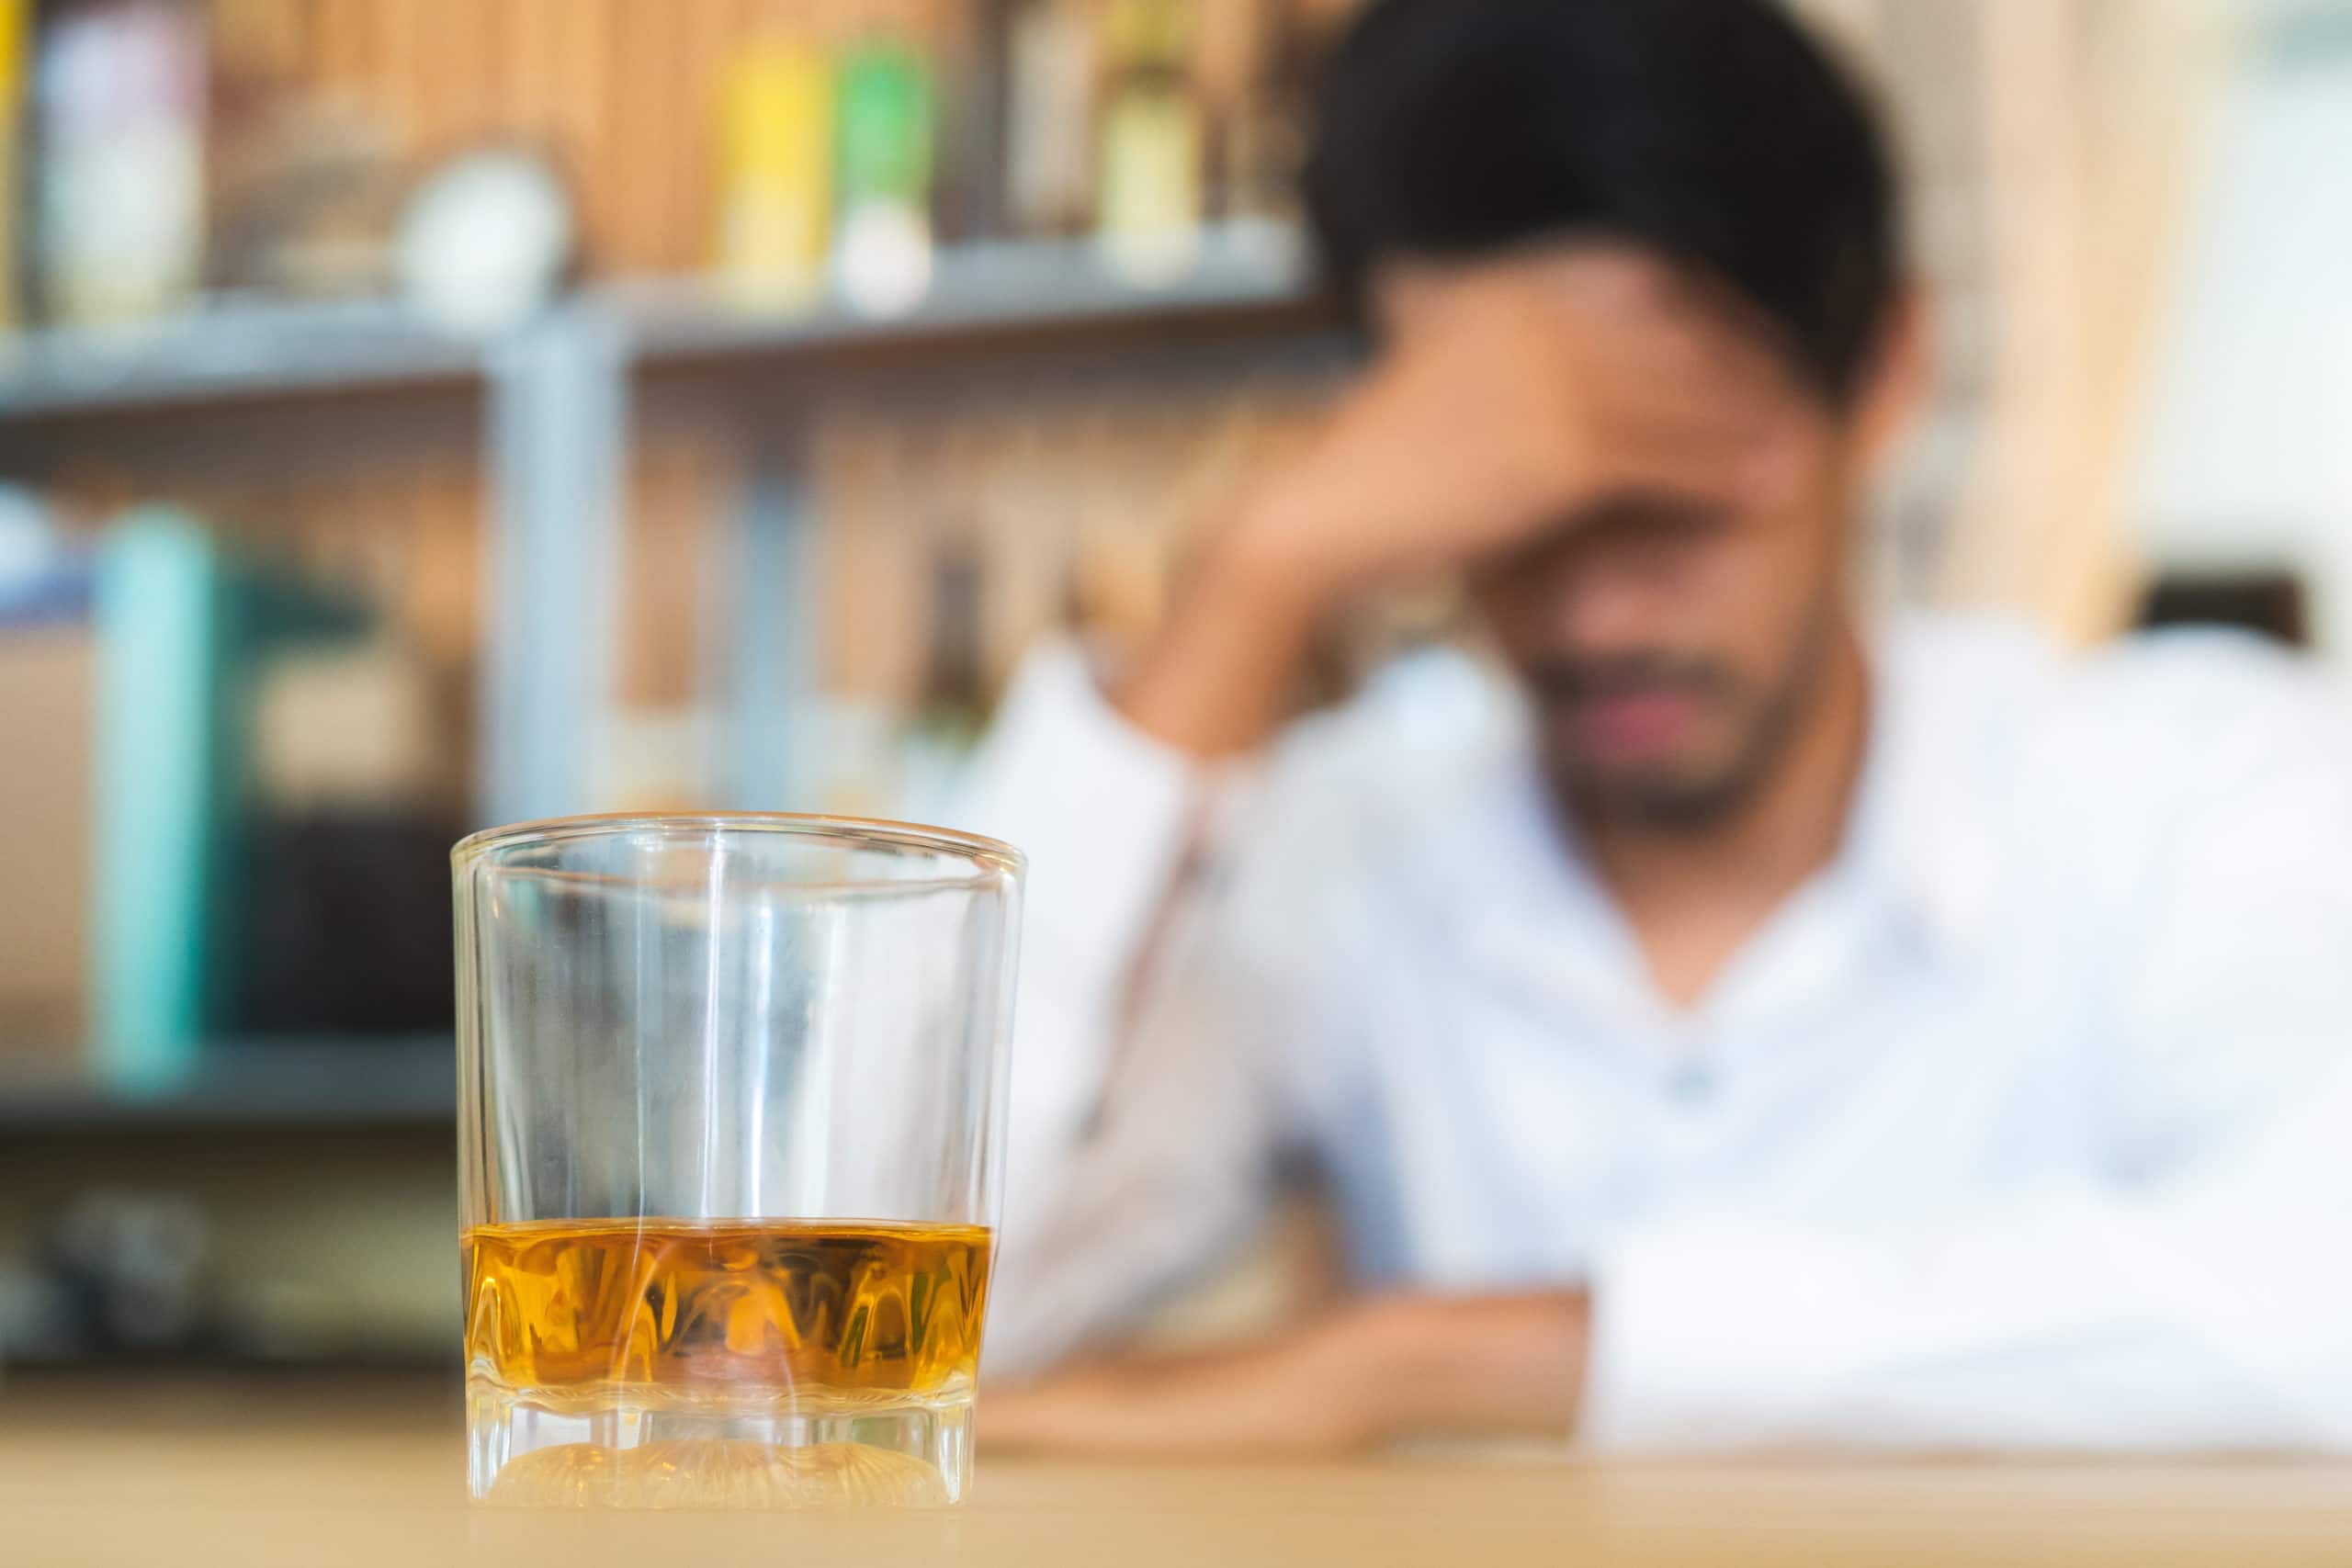 There are many factors that go into the development of an alcohol use disorder and one of these can be genetics. Learn more here.